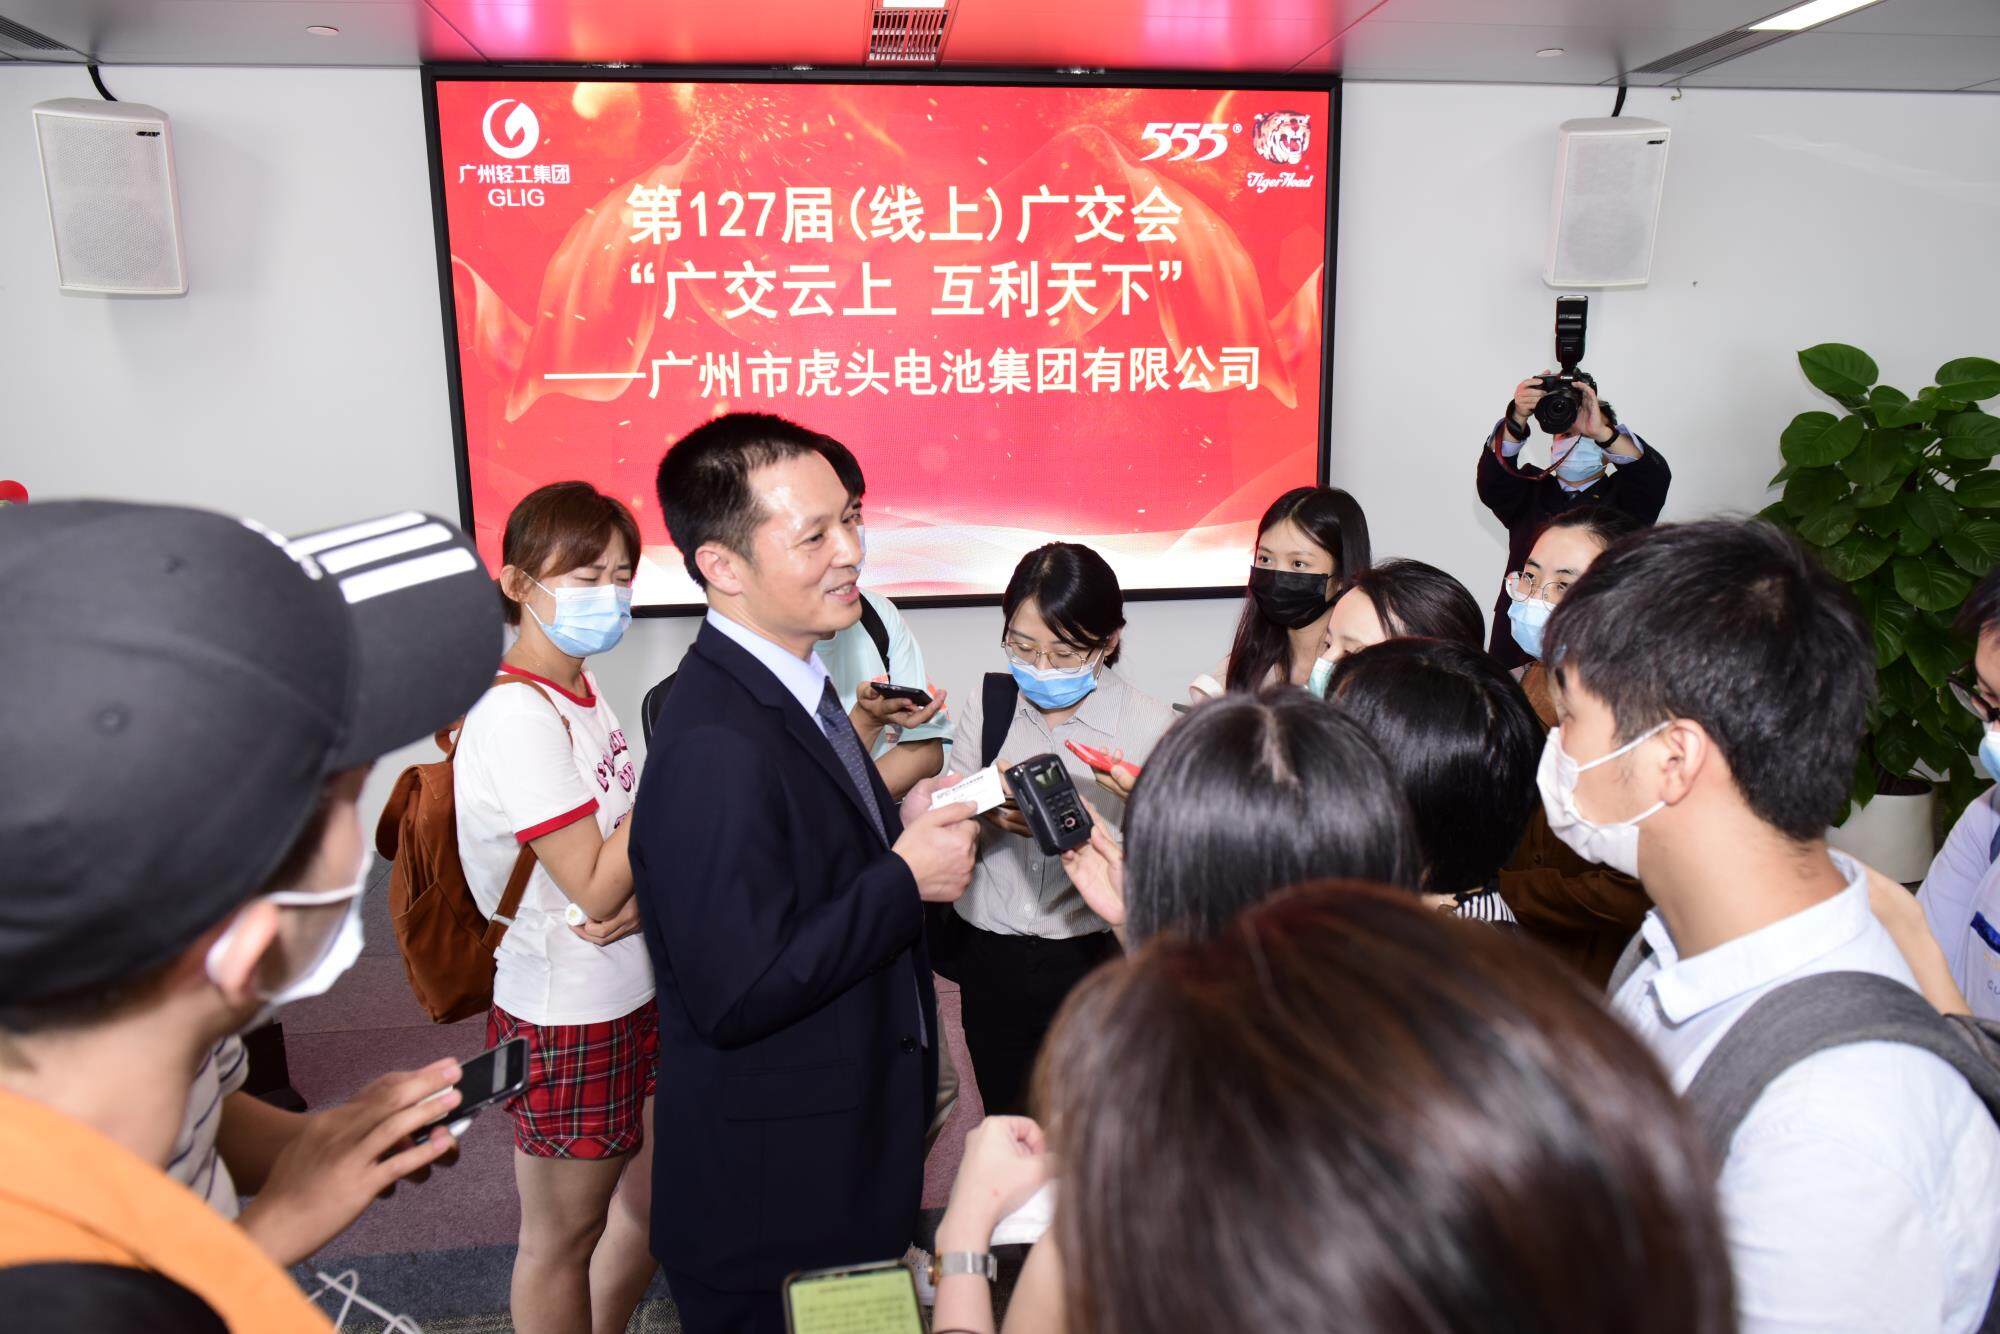 "Online Canton Fair" Embarks on a New Development Journey, Seizes New Development Opportunities under the Epidemic-News Media Publicizes and Reports on Tiger Head Company